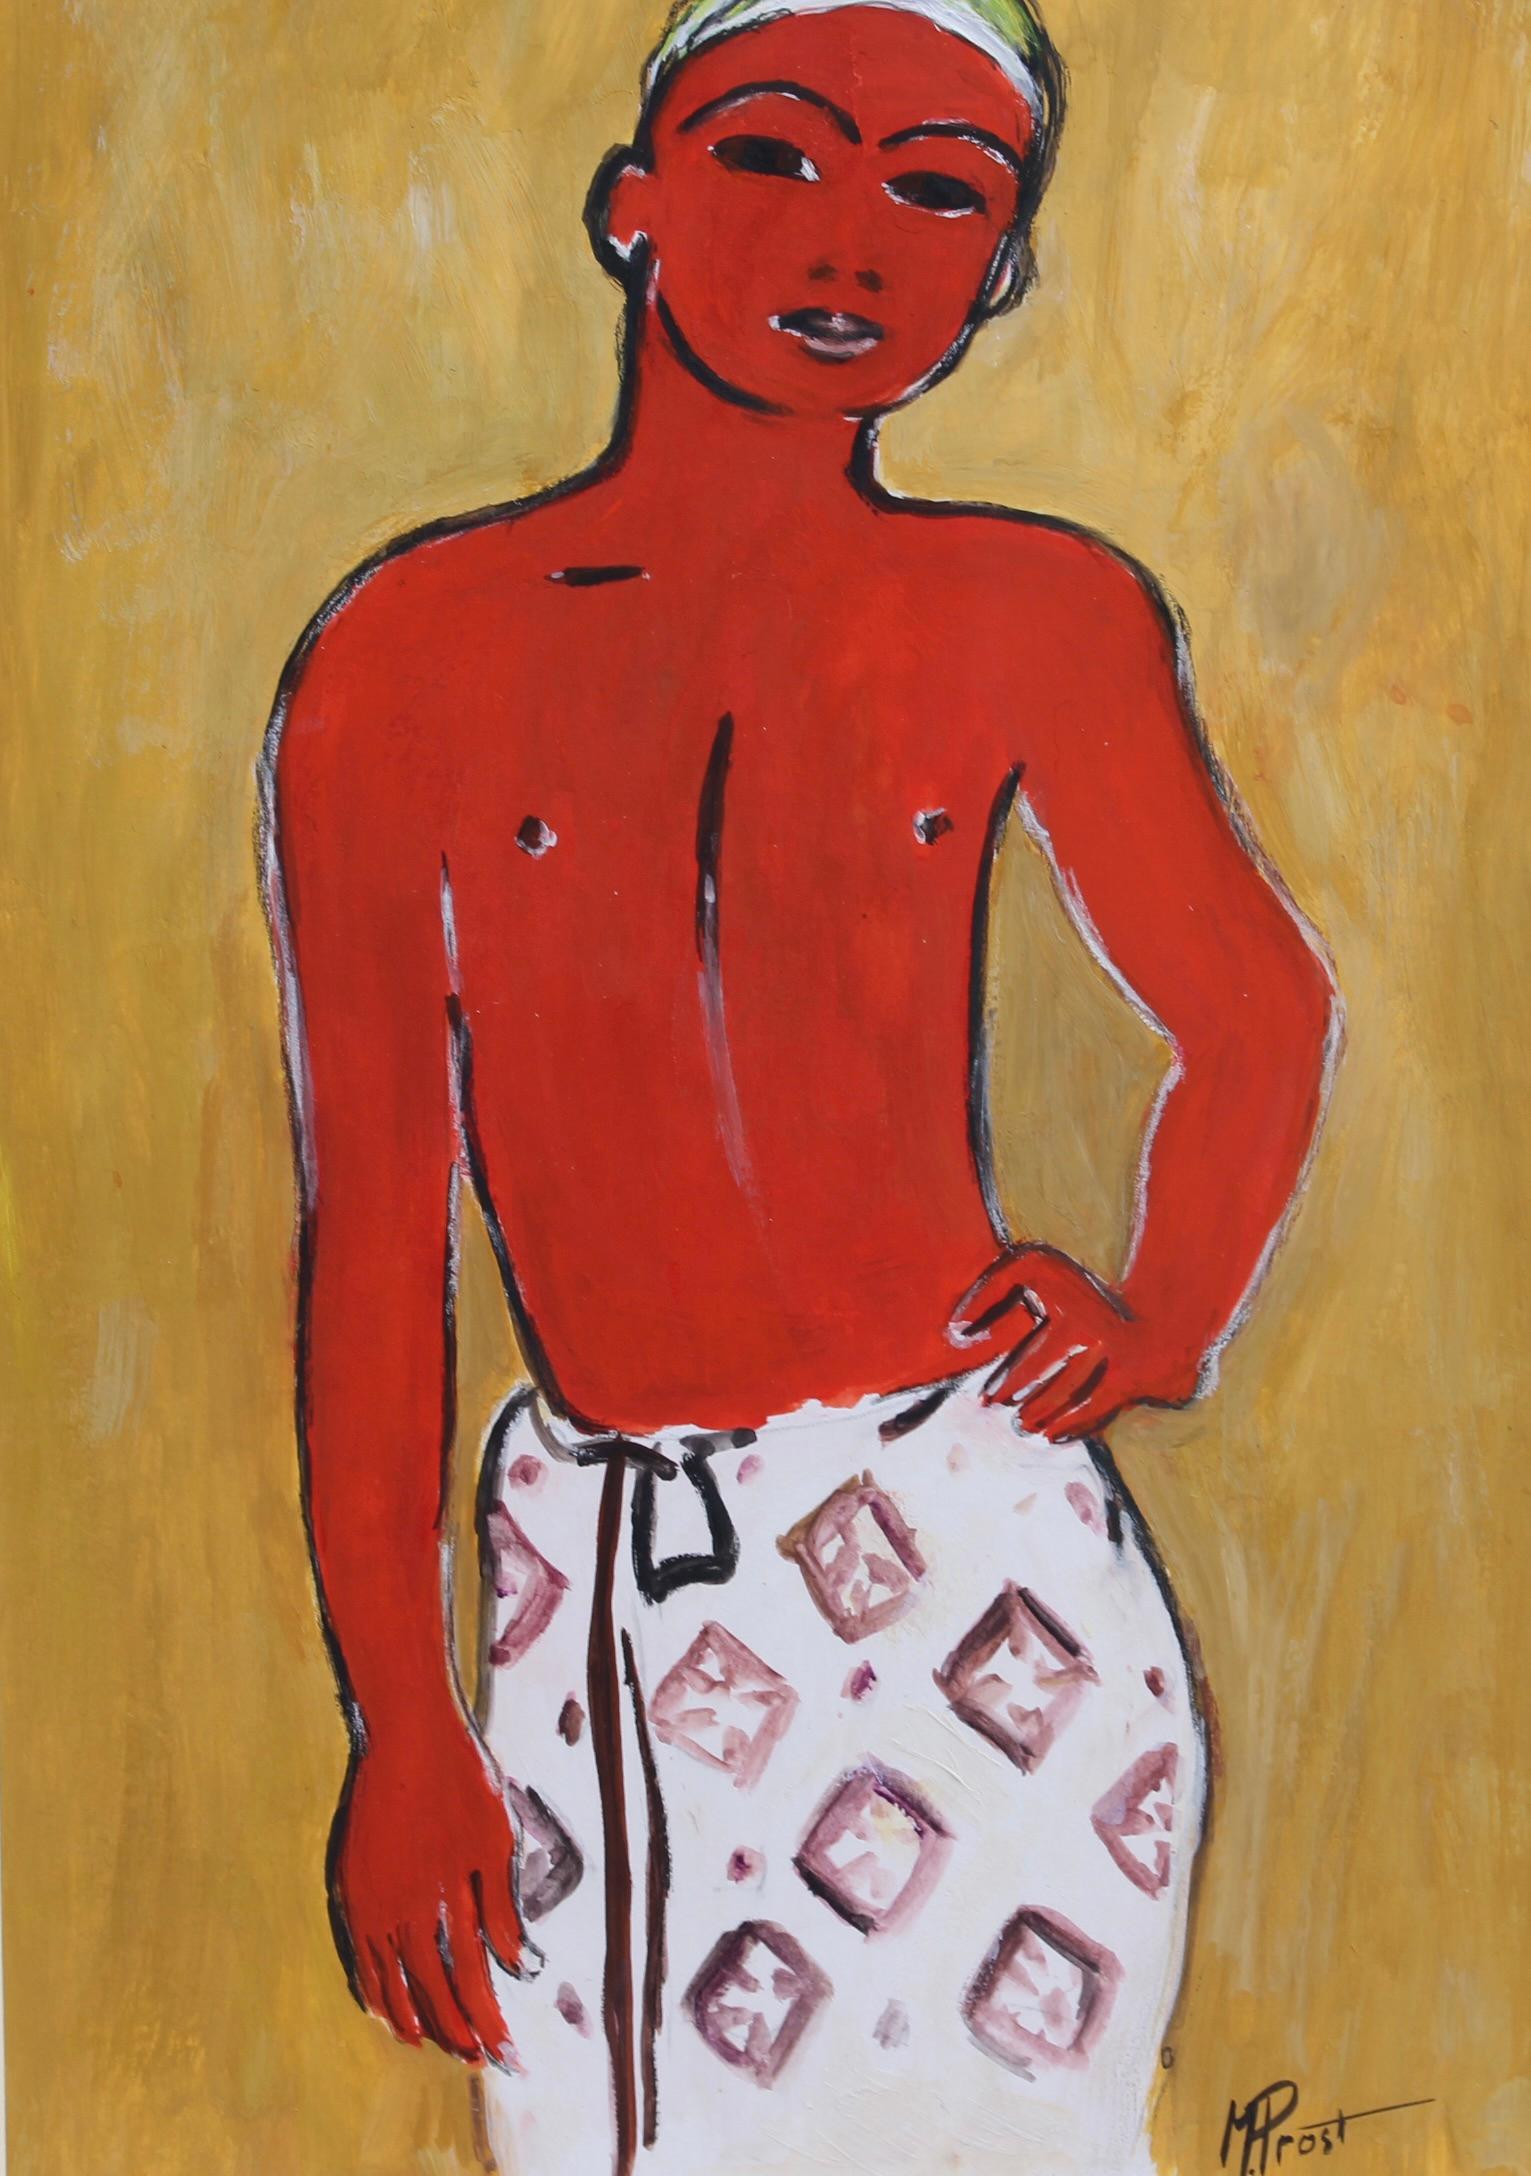 'Young Man in Sarong', gouache and ink on paper, by French School artist, M. Prost (circa 1950s). Discovered in Paris, this colourful depiction of a young man wearing a traditional sarong is absolutely charming. Not knowing exactly where this type